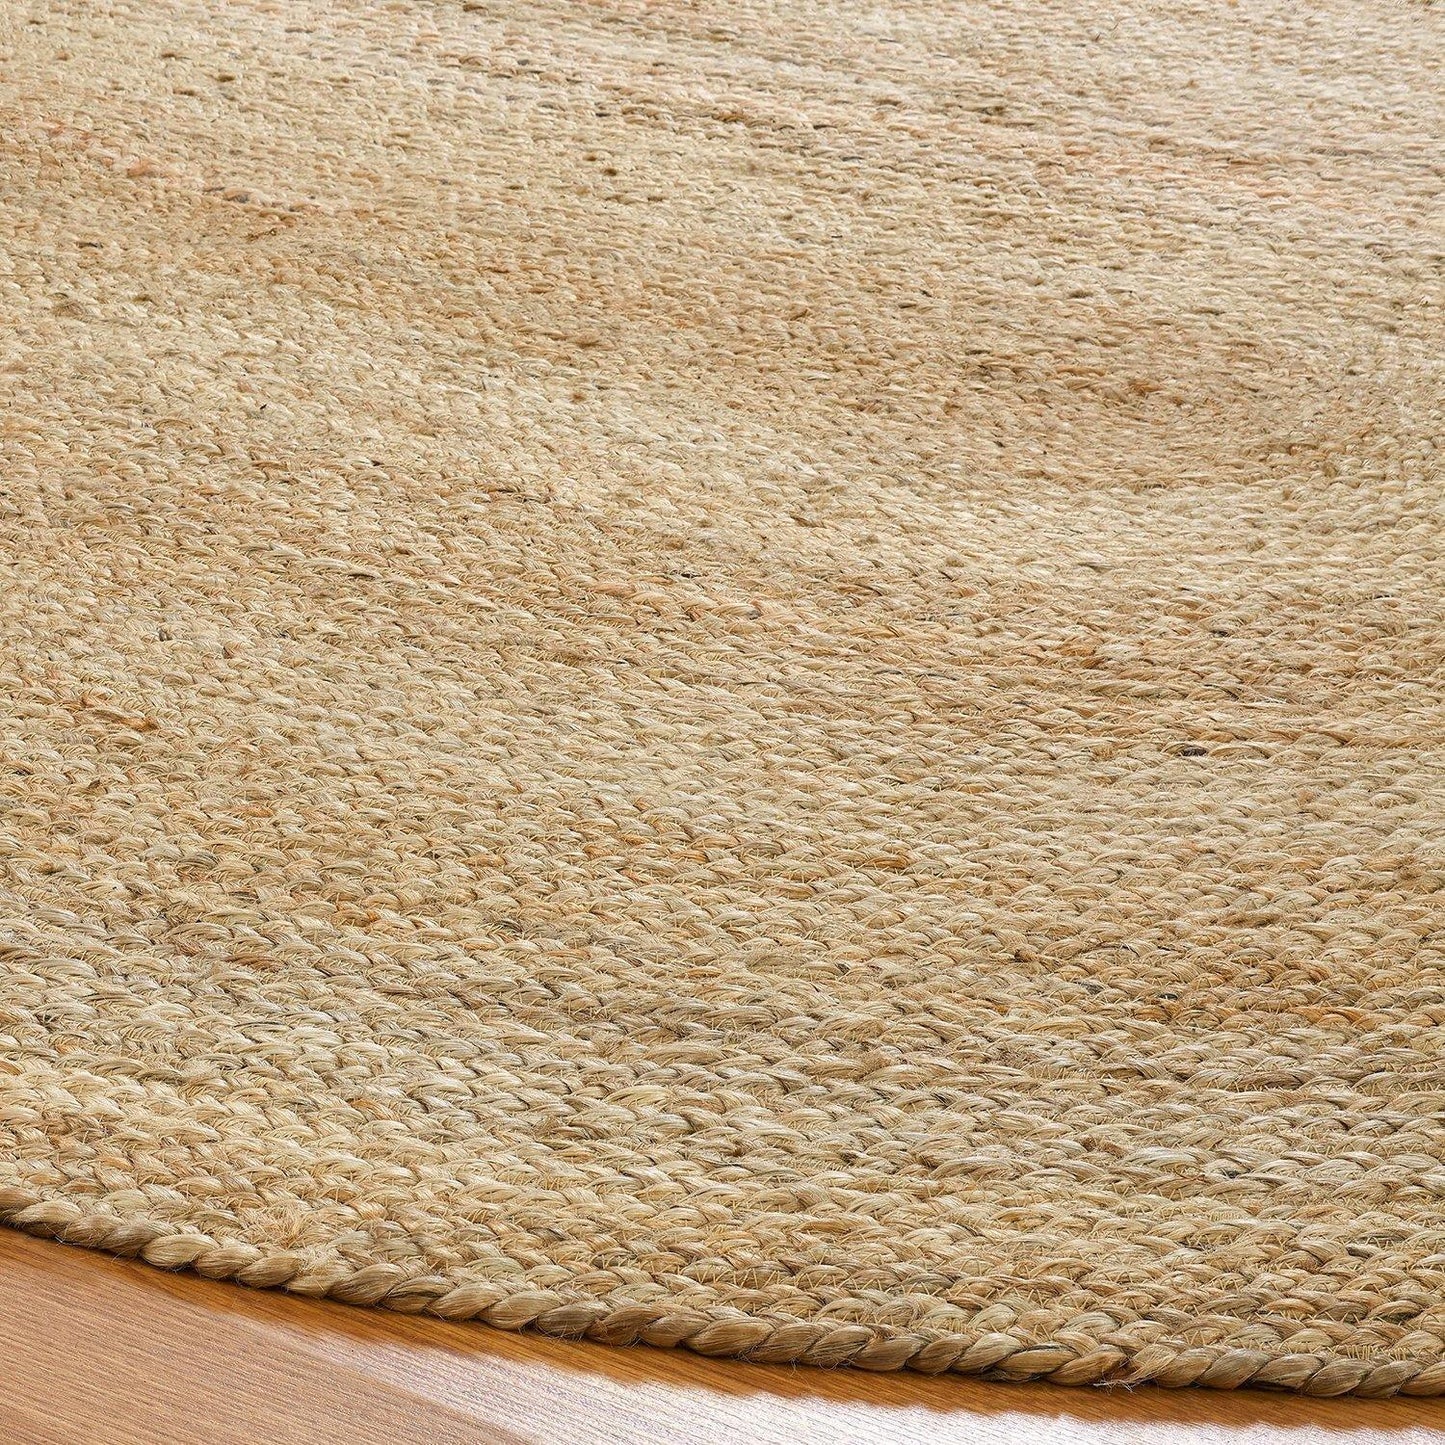 Superior Natural Braided Collection Hand Woven Jute Rug FredCo